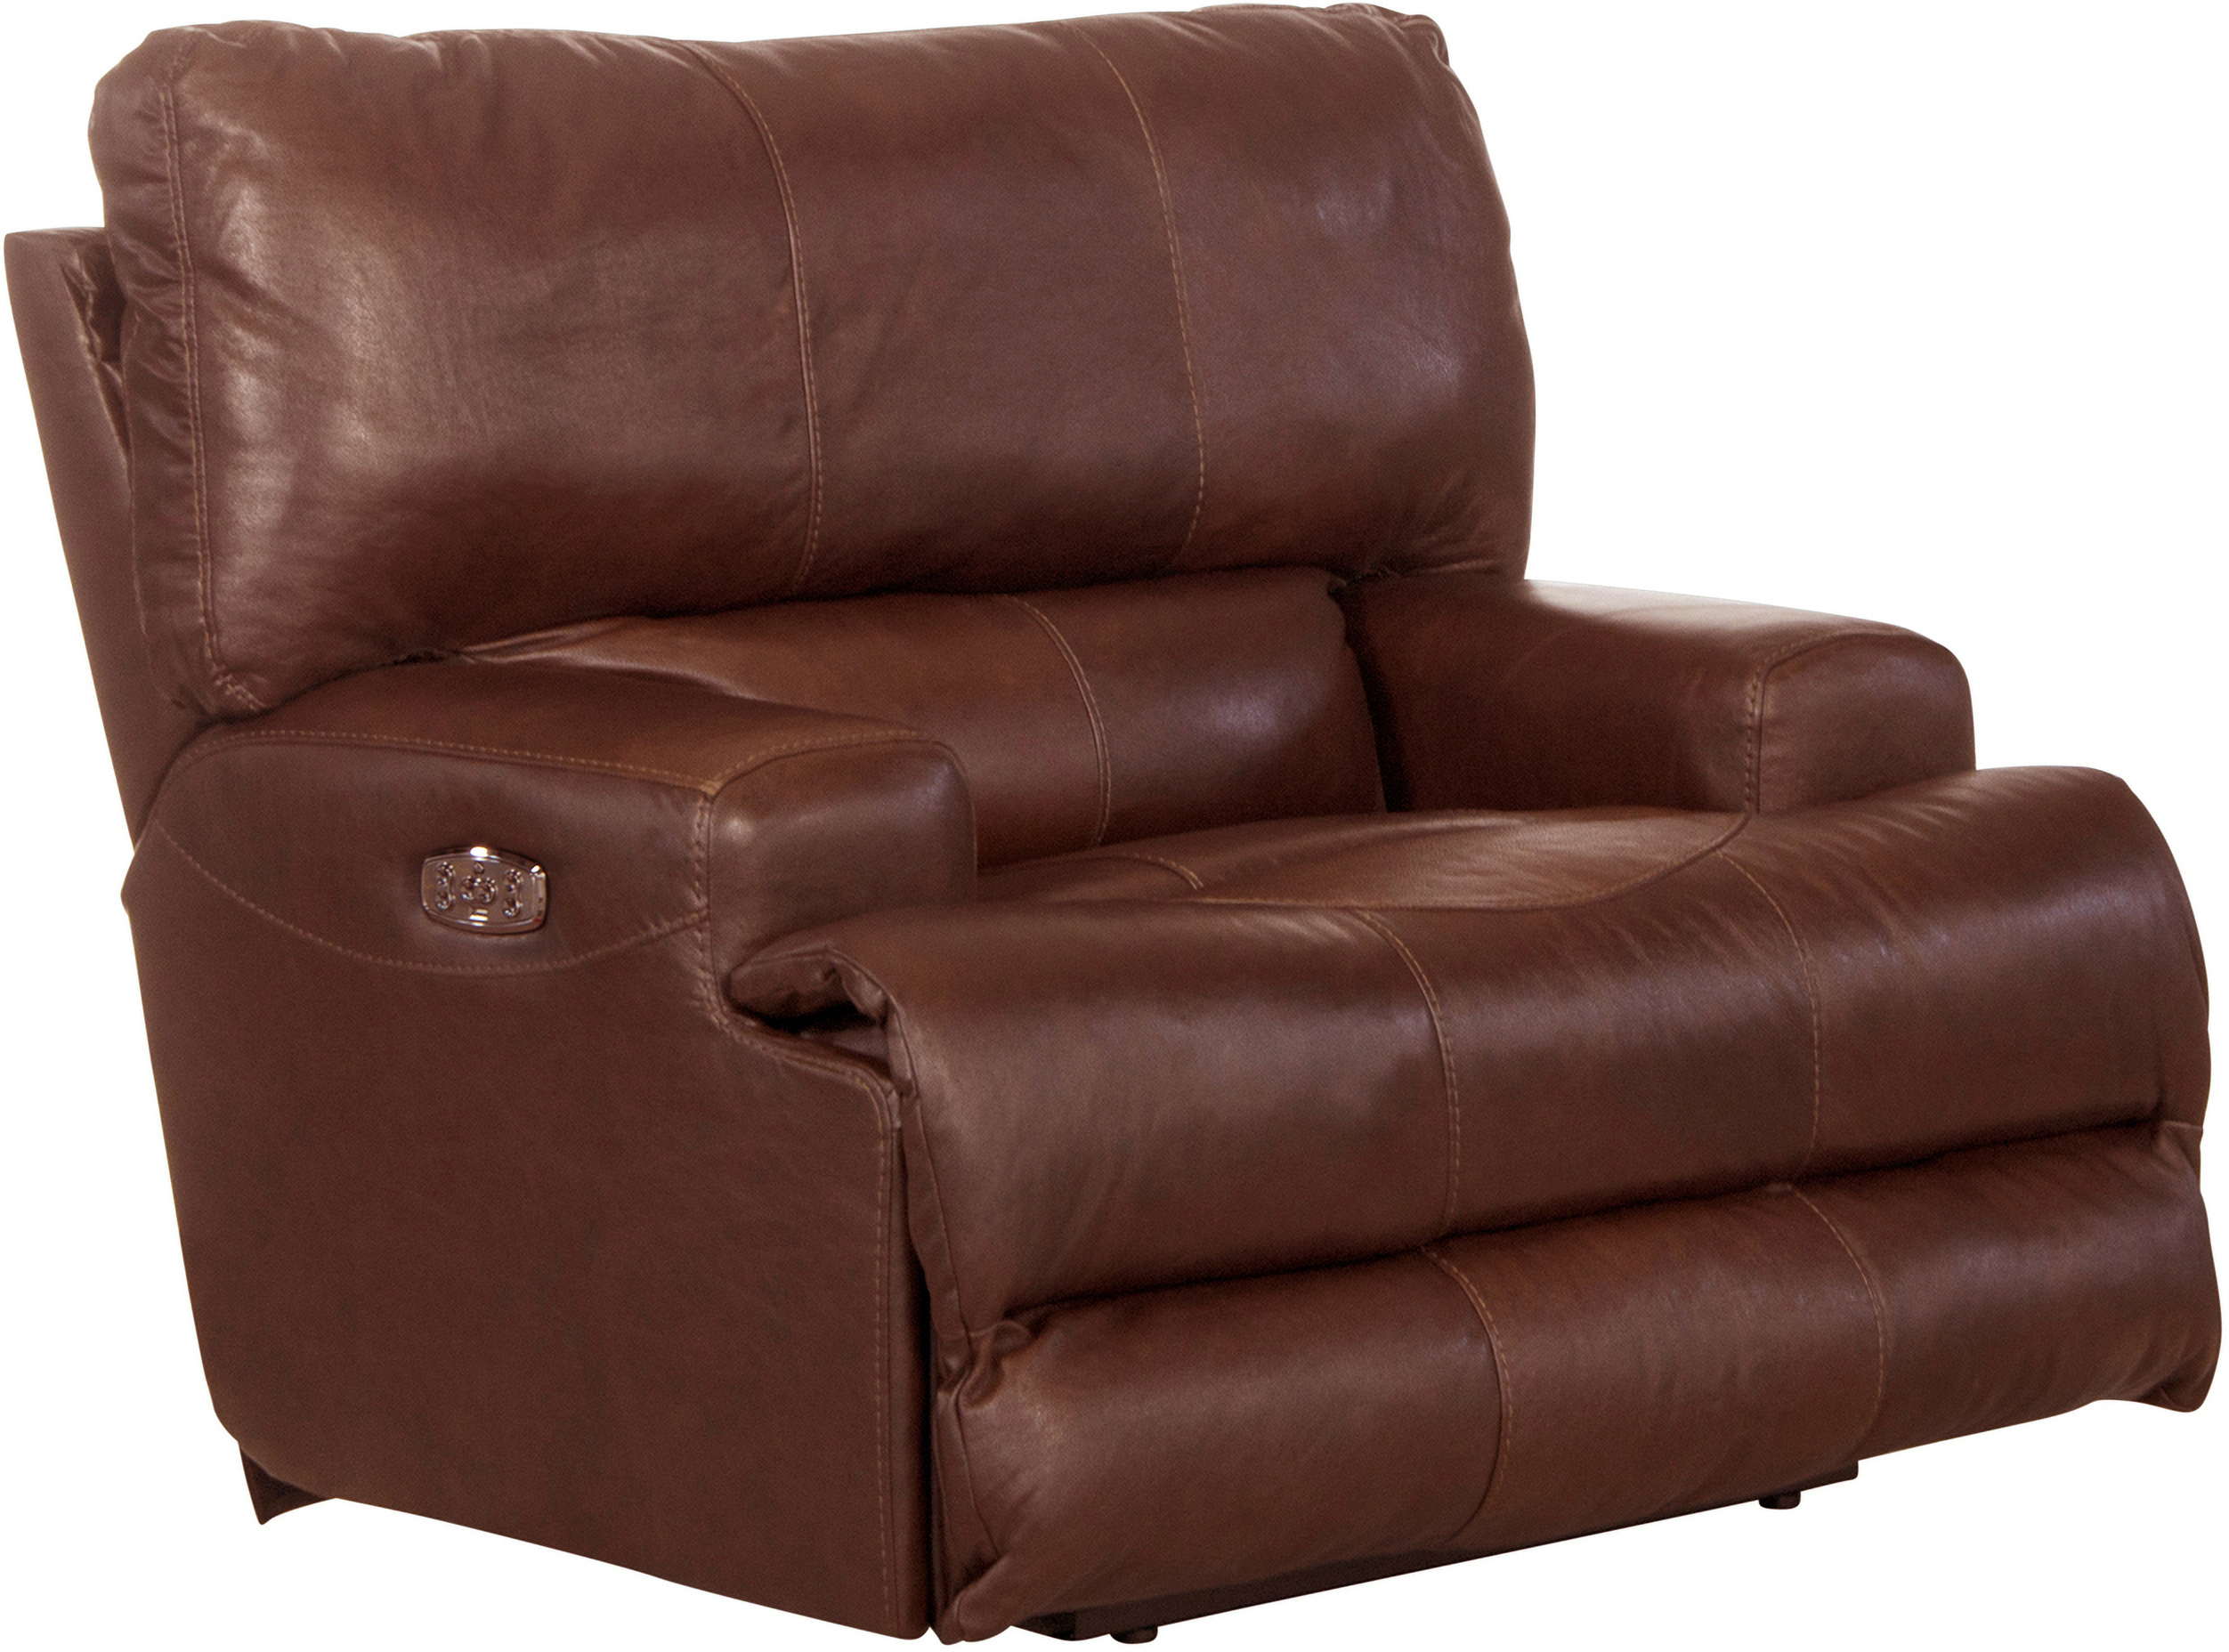 https://cdn.1stopbedrooms.com/media/catalog/product/w/e/wembley-power-lay-flat-recliner-with-power-adjustable-headrest-and-lumbar-support-in-walnut_qb13442453.jpg